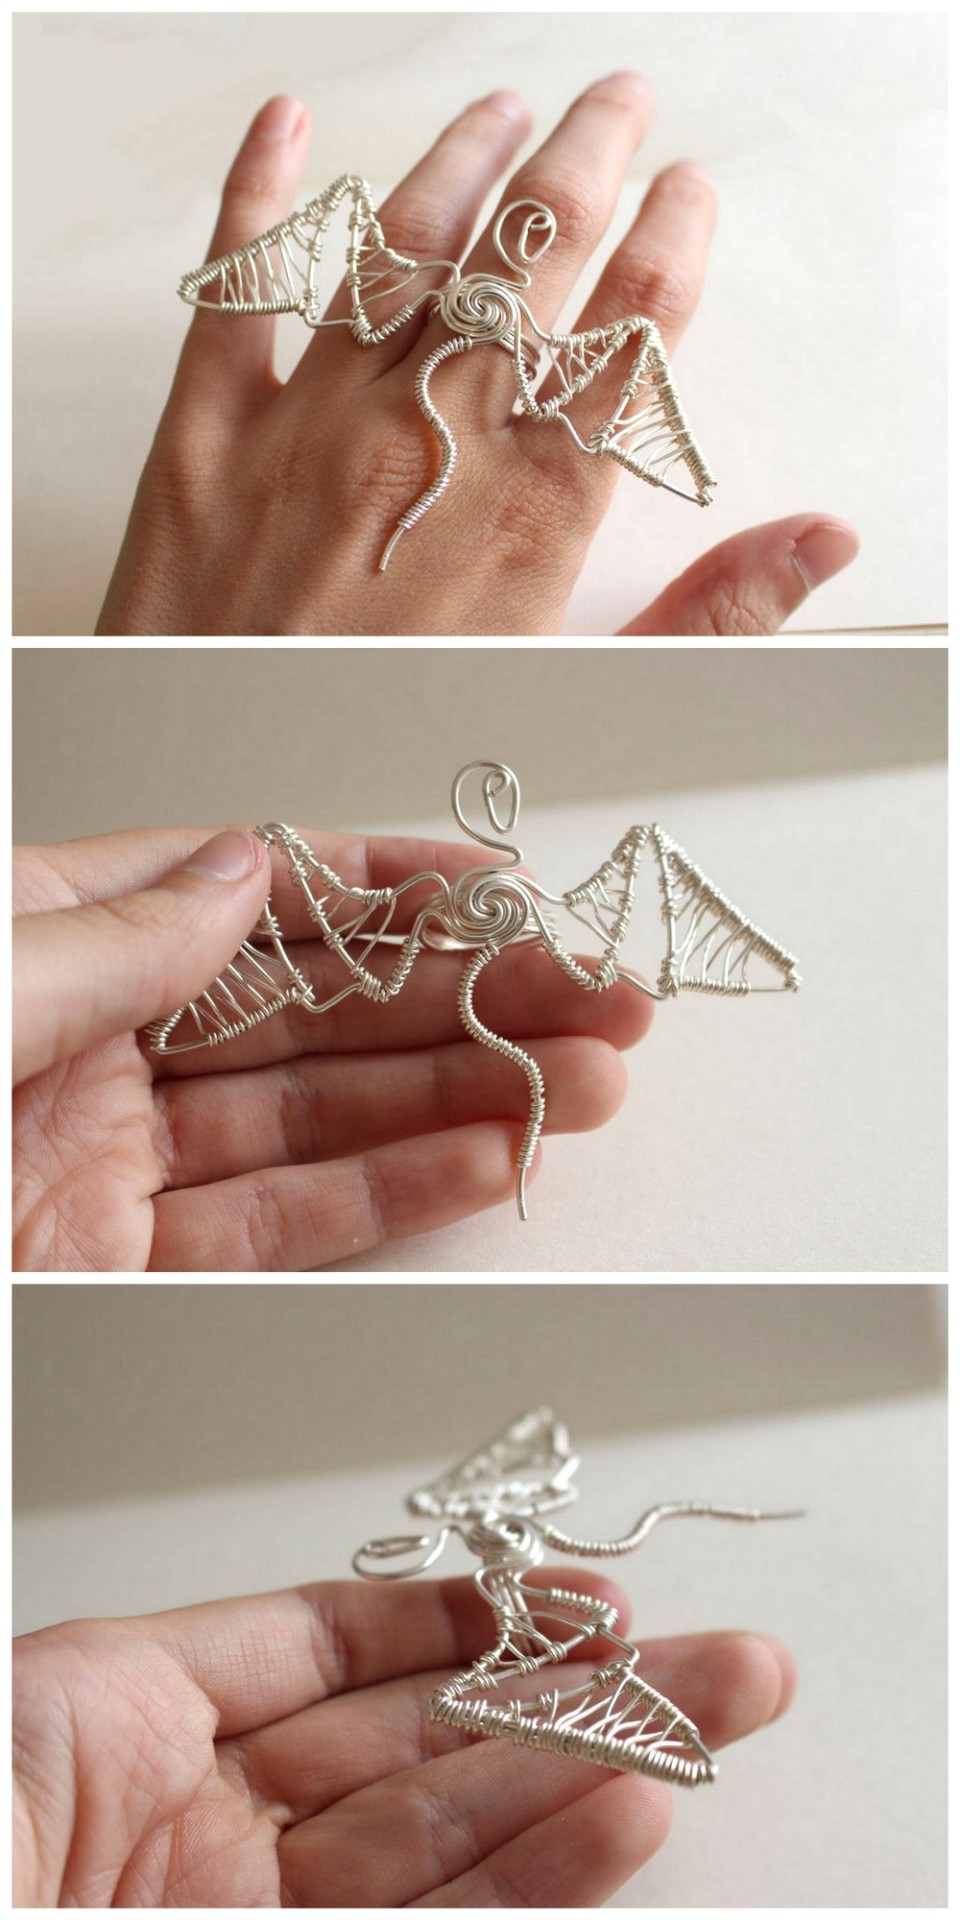 DIY Wirework Dragon RingAre you a fan of the Hobbit? emilyvanleemput of Instructables was inspired by Smaug the dragon. This ring also could be for Game of Thrones’ fans of the dragons: Drogon, Rhaegal, and Viserion.
“While rewatching The Hobbit, I...